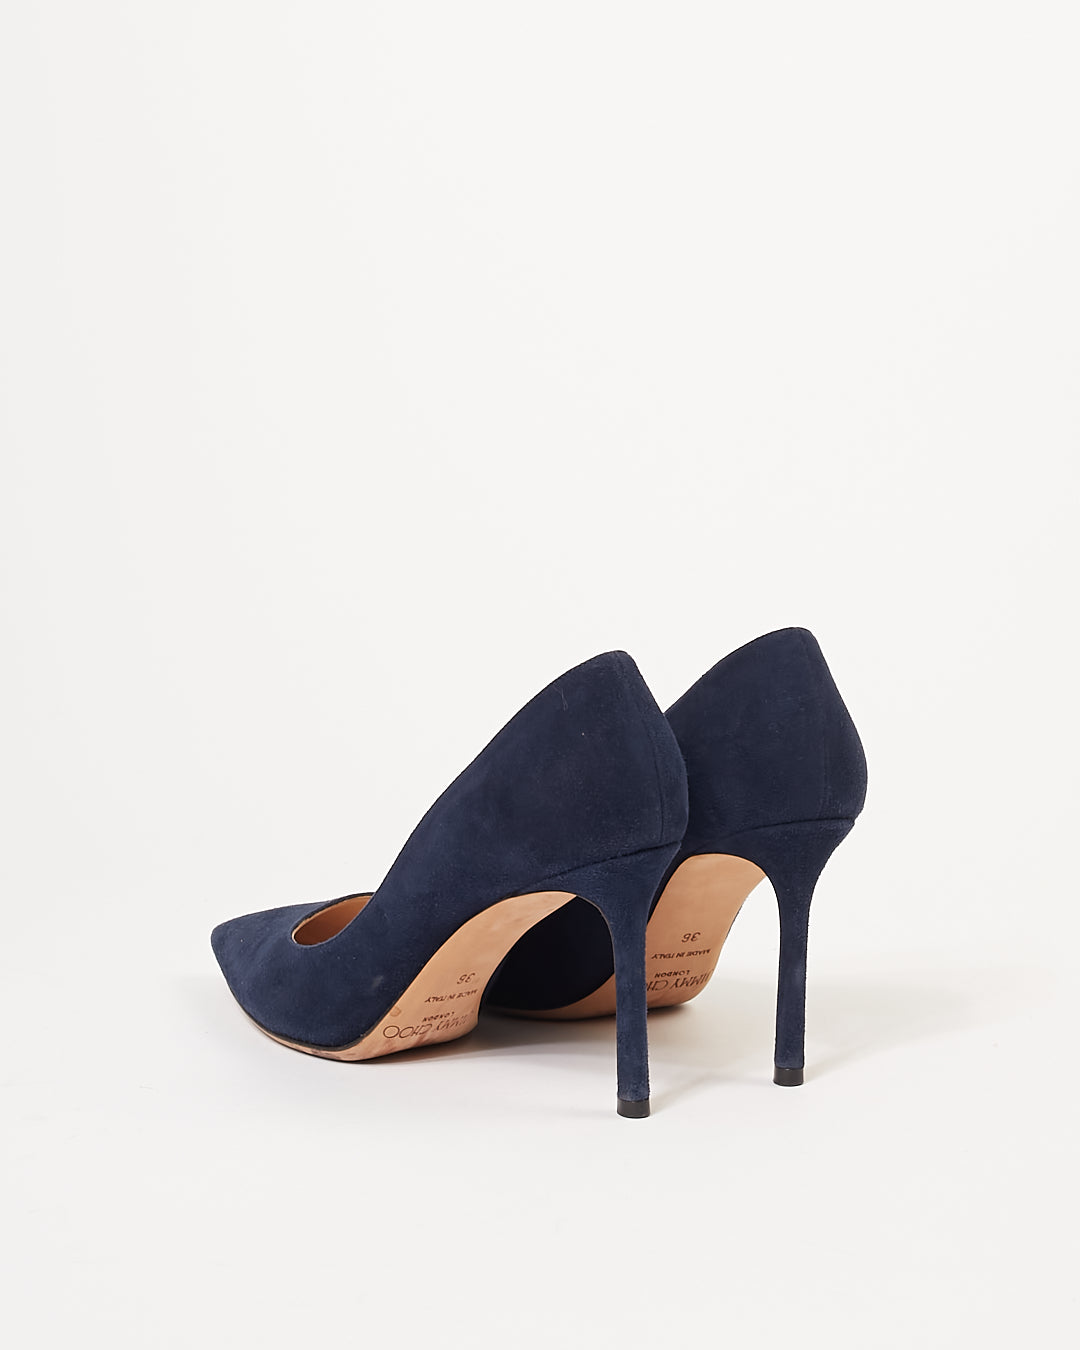 Jimmy Choo Navy Suede Point Toe Pumps - 36